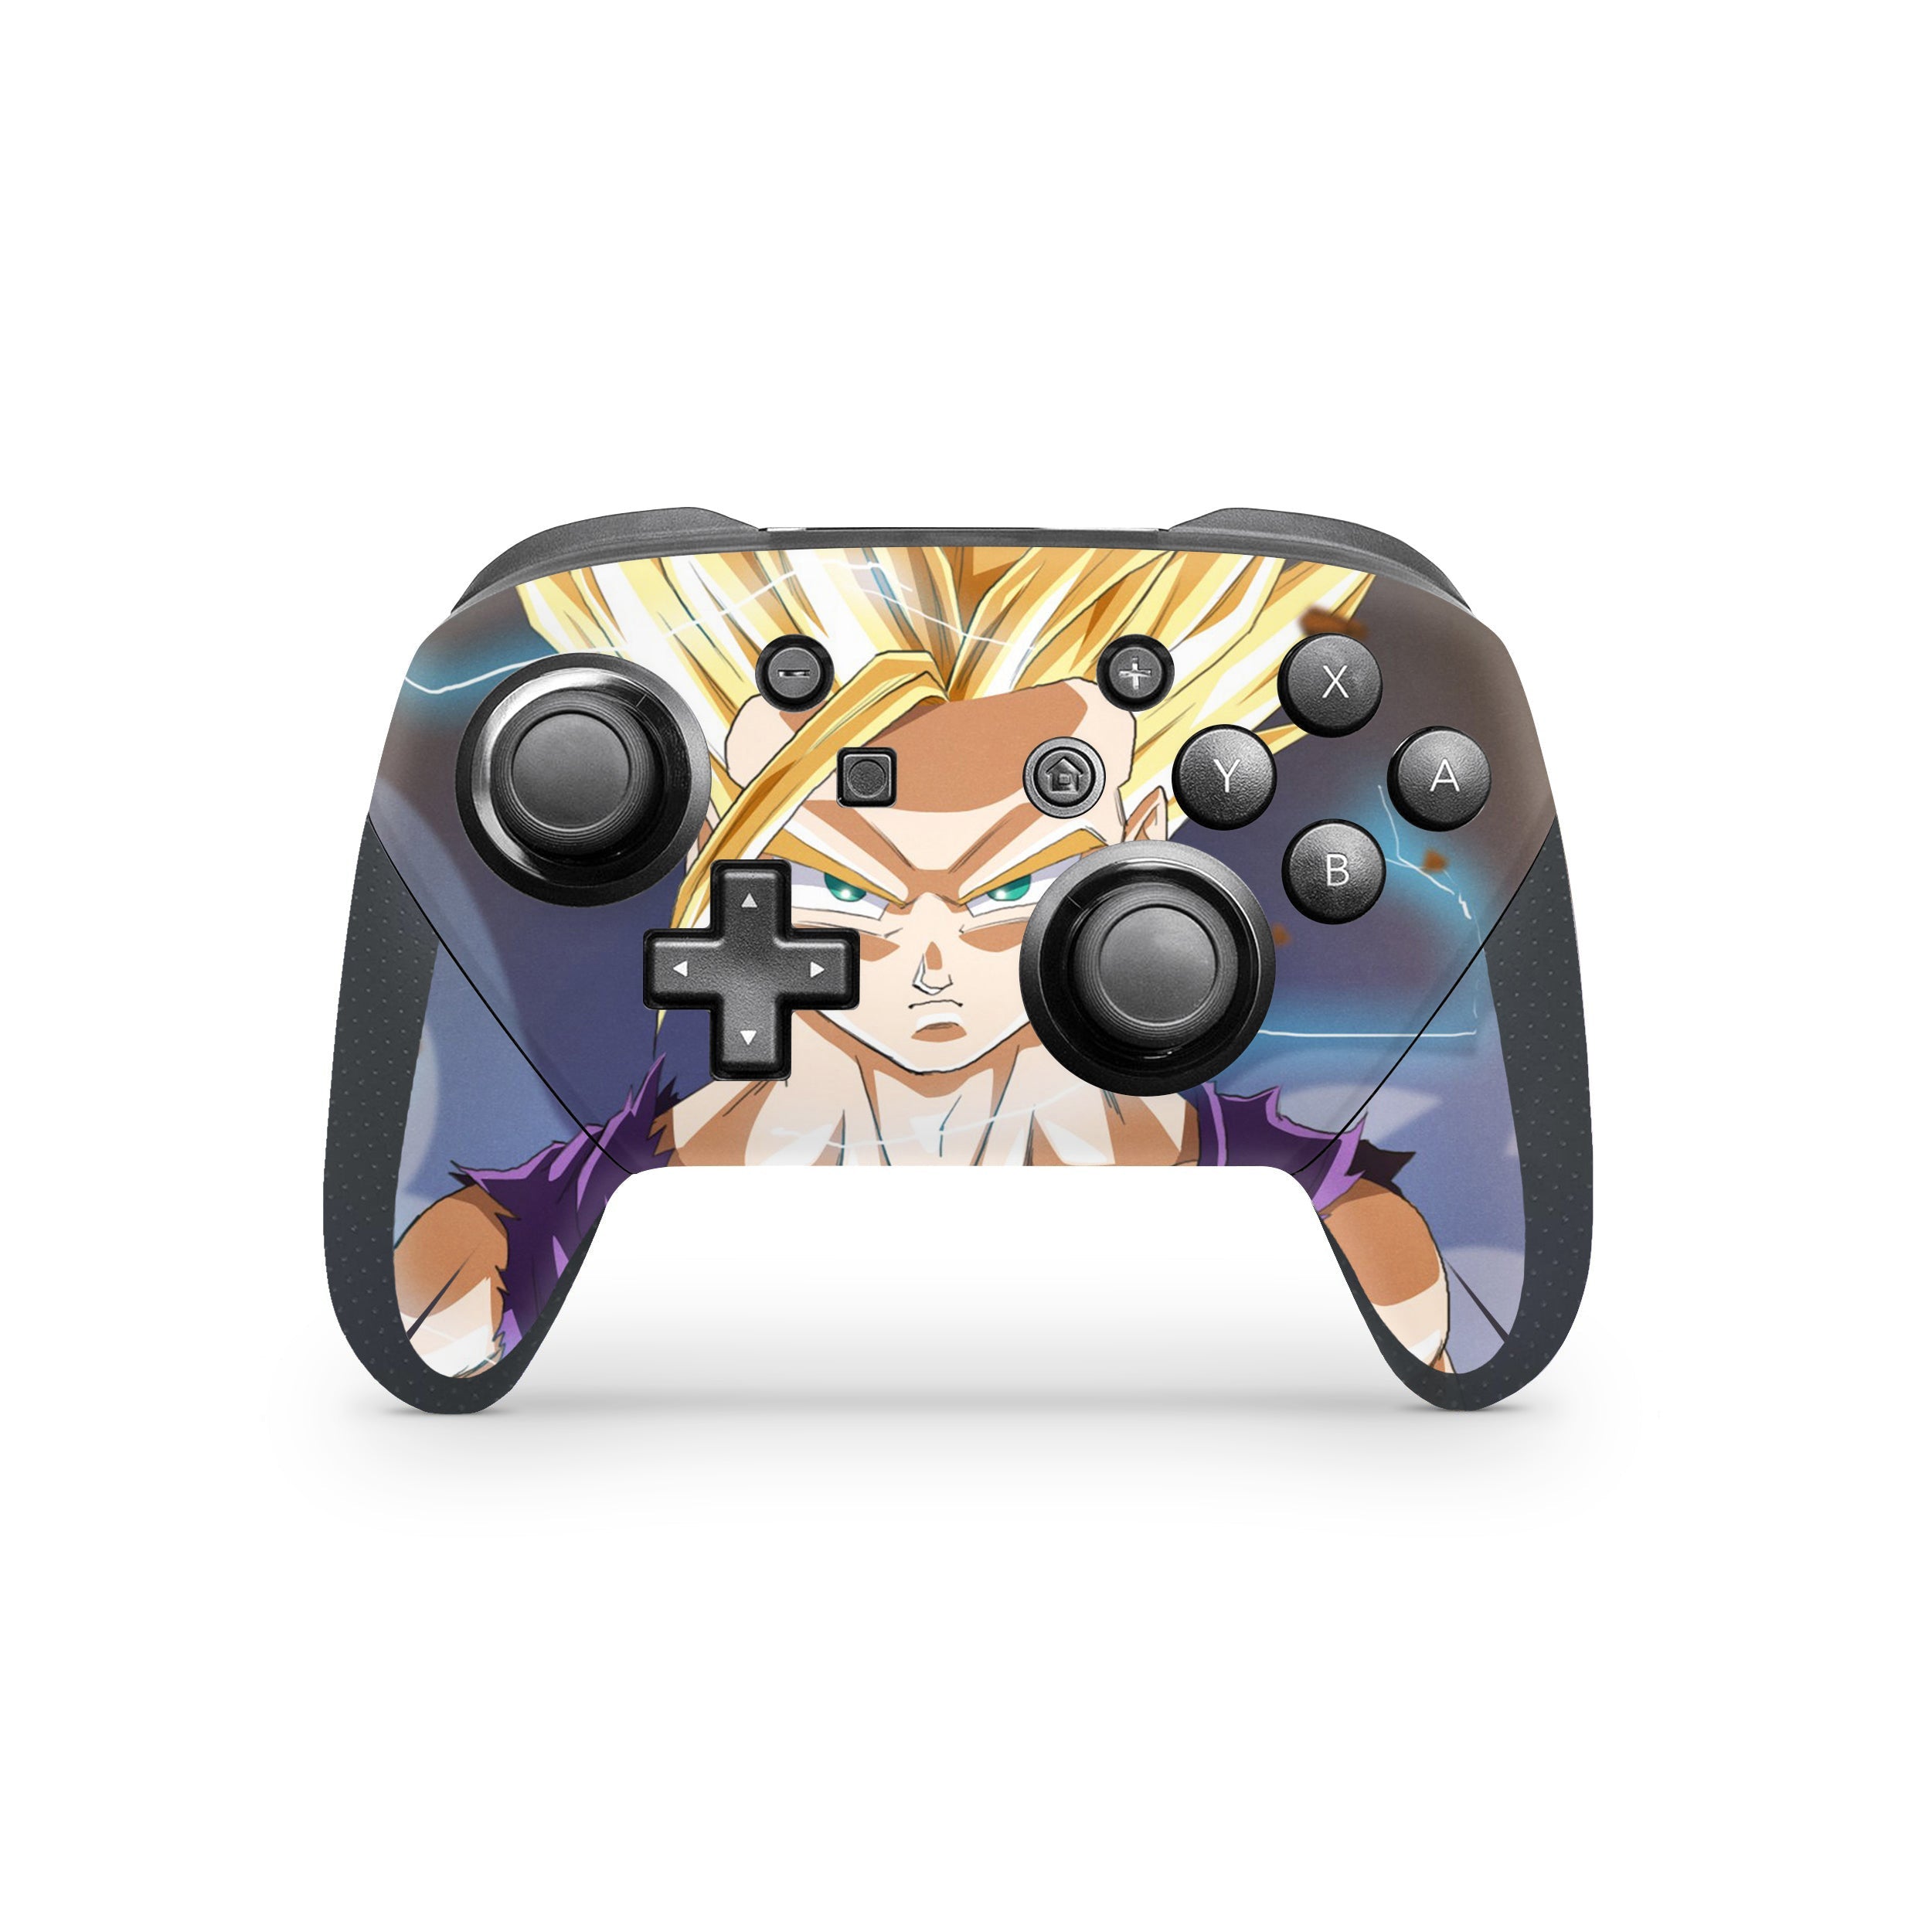 A video game skin featuring a Dragon Ball Z Gohan design for the Switch Pro Controller.